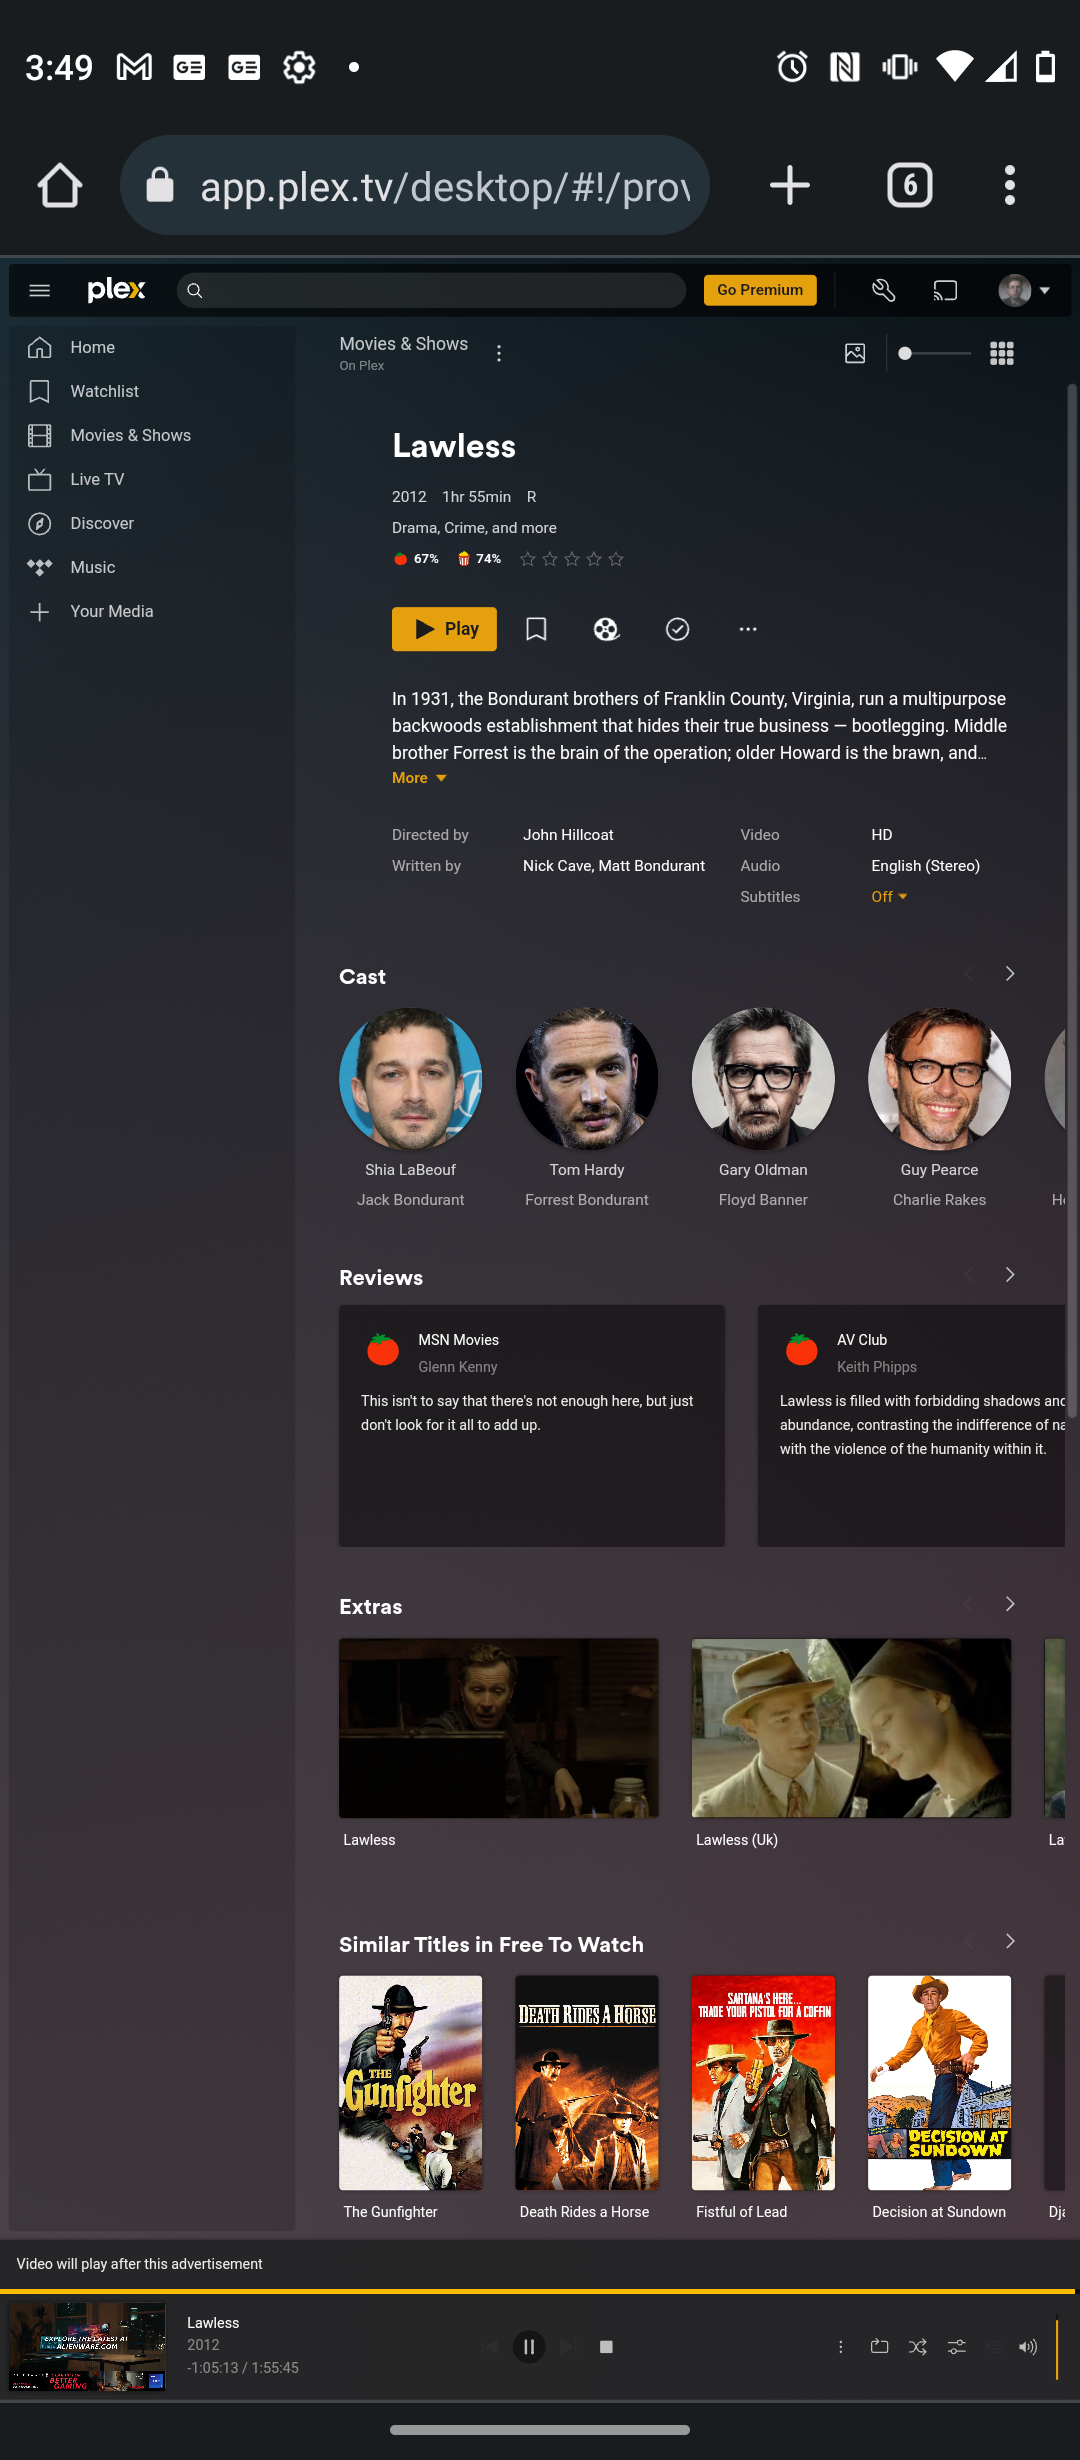 Cast information for a title on Plex viewed on mobile web.